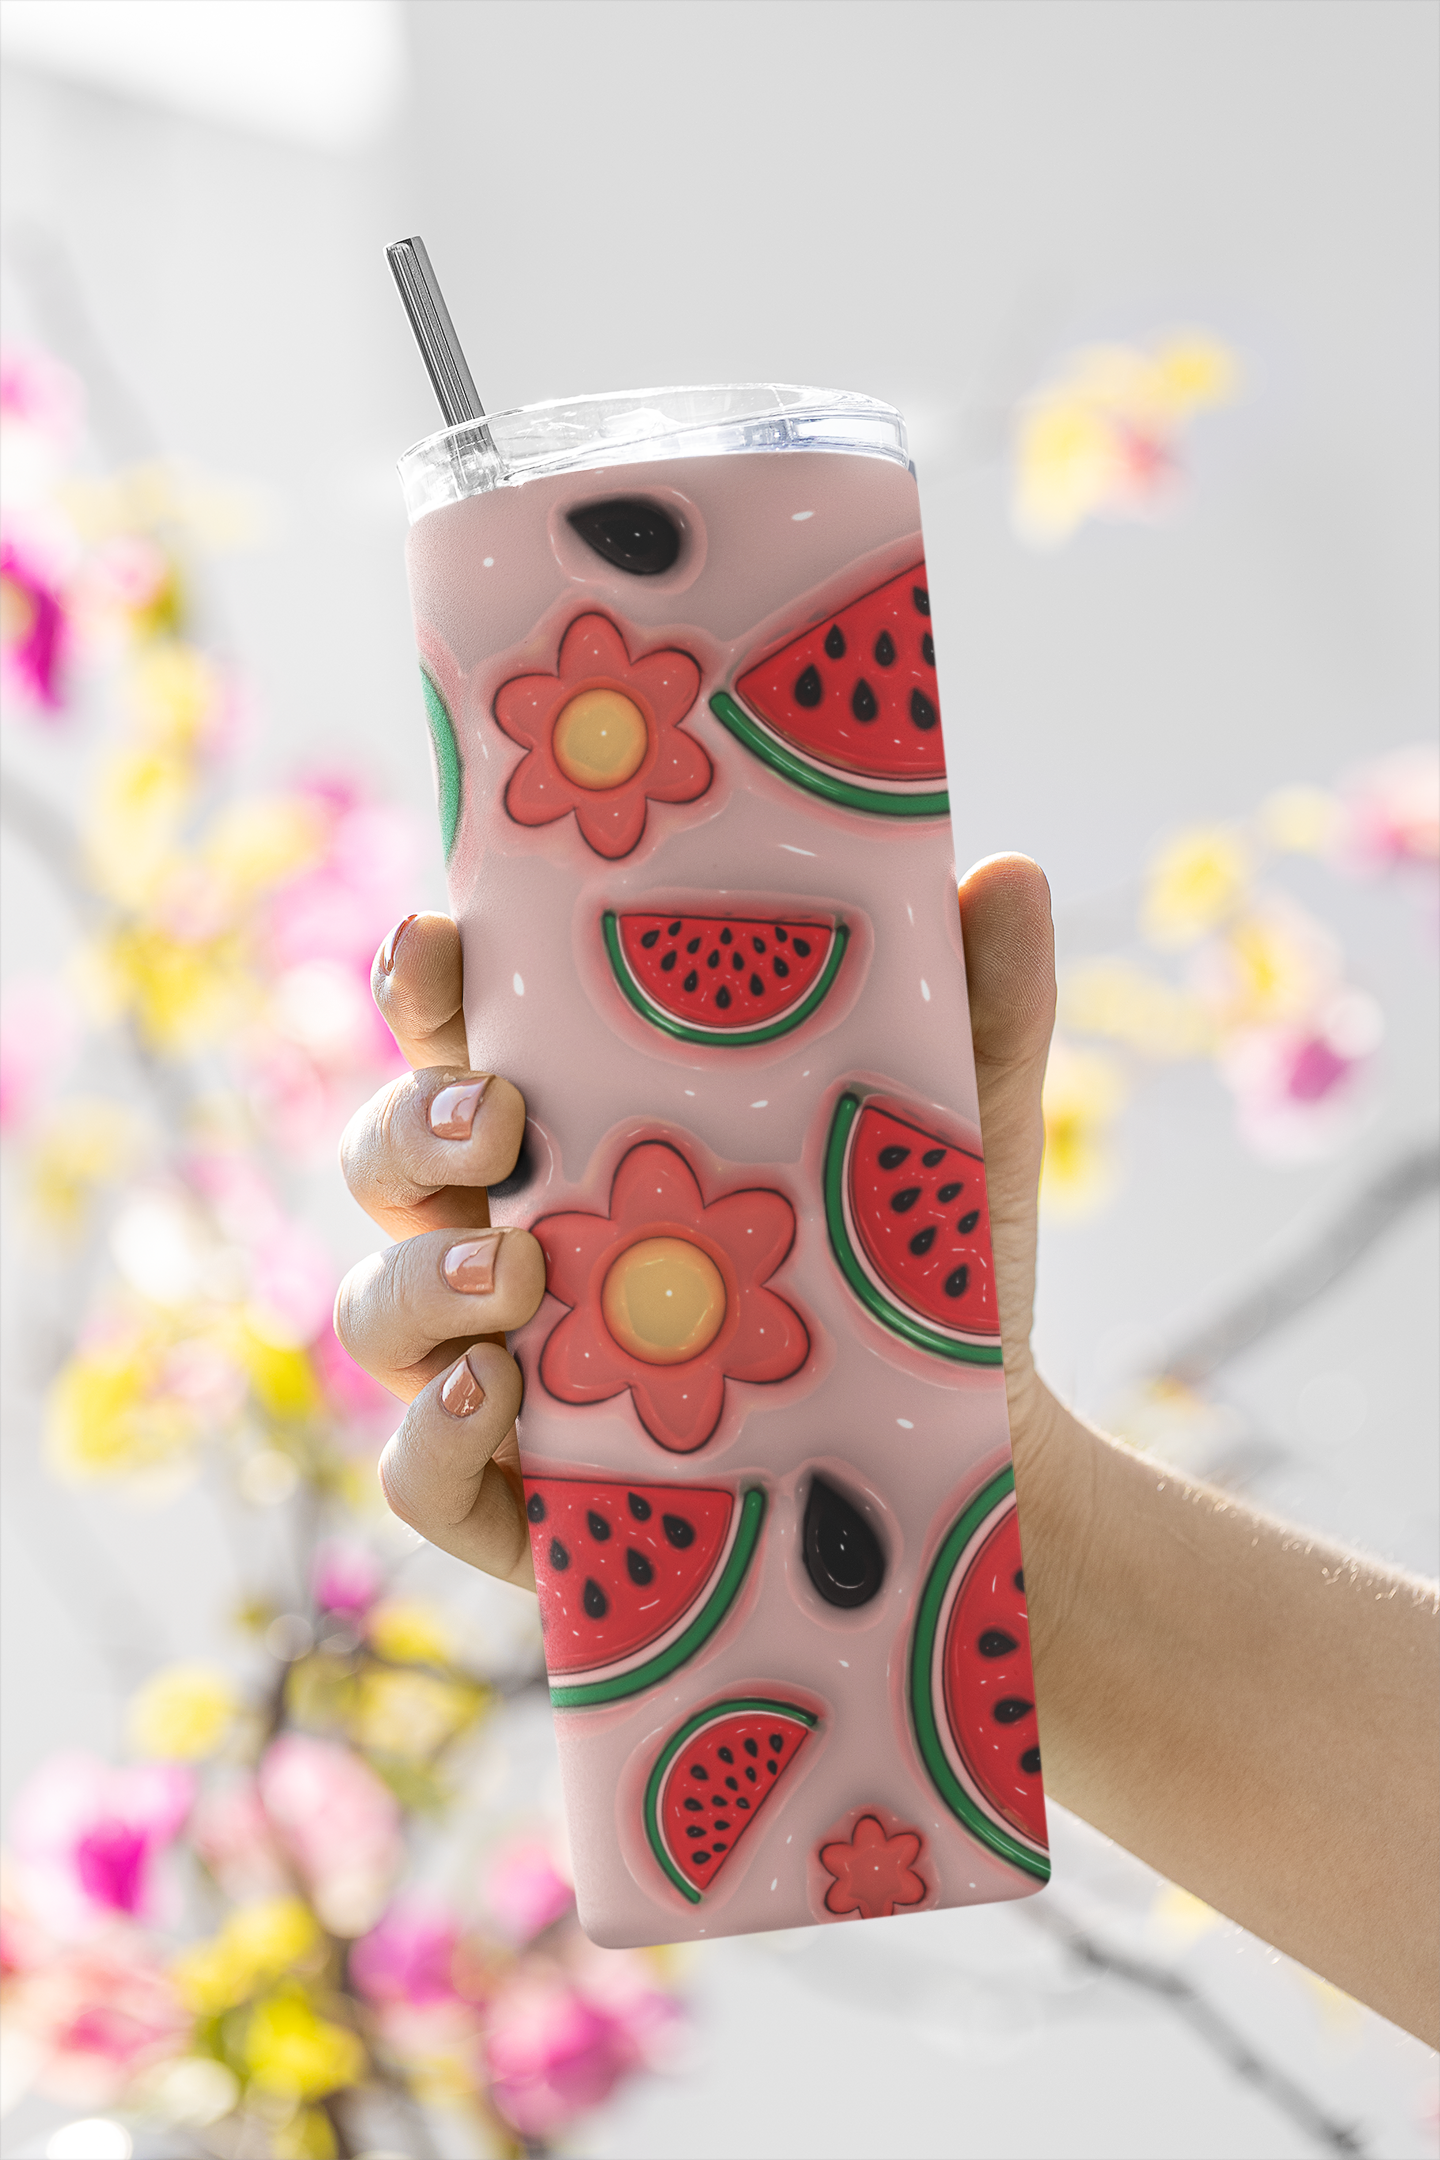 Flowers and watermelon sublimation wrap png, watermelon, flowers, sublimation designs, tumbler ideas